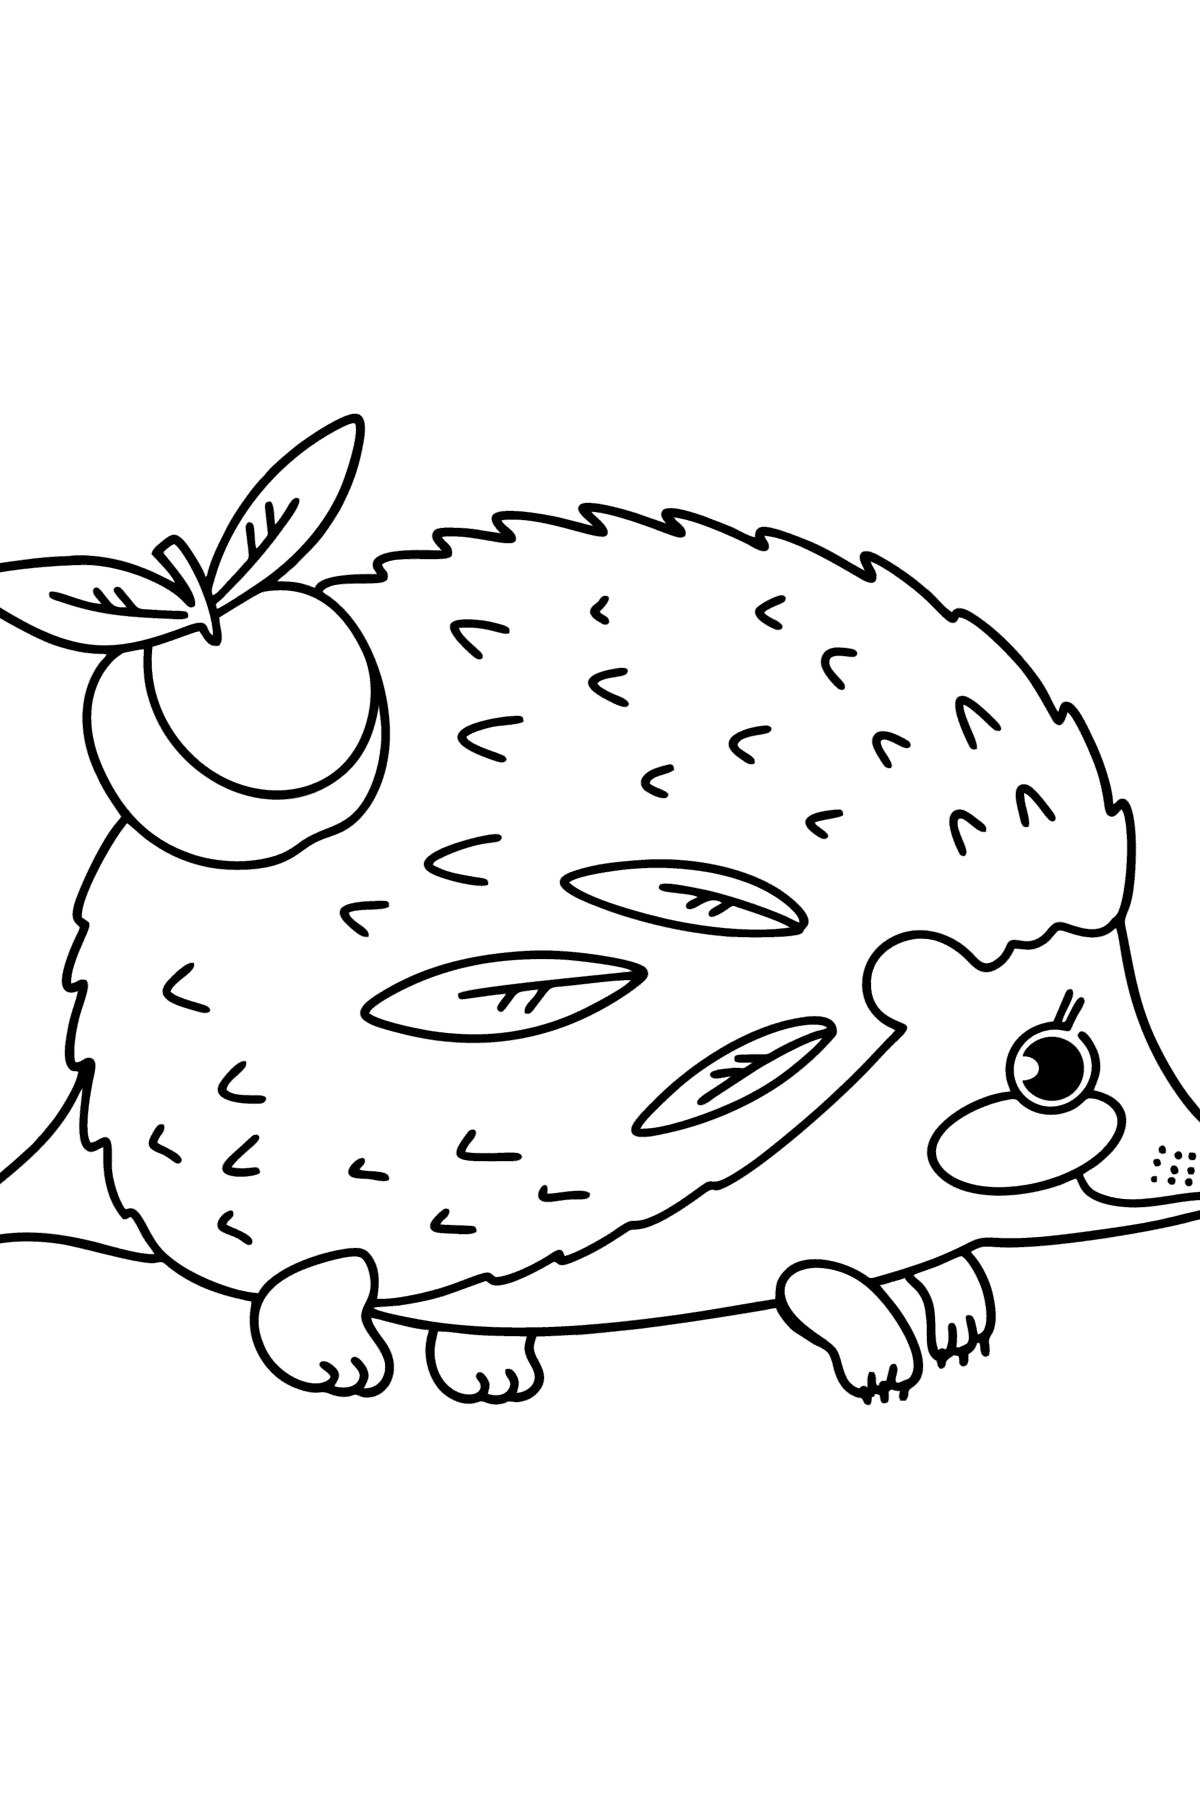 Hedgehog for kids сoloring page - Coloring Pages for Kids